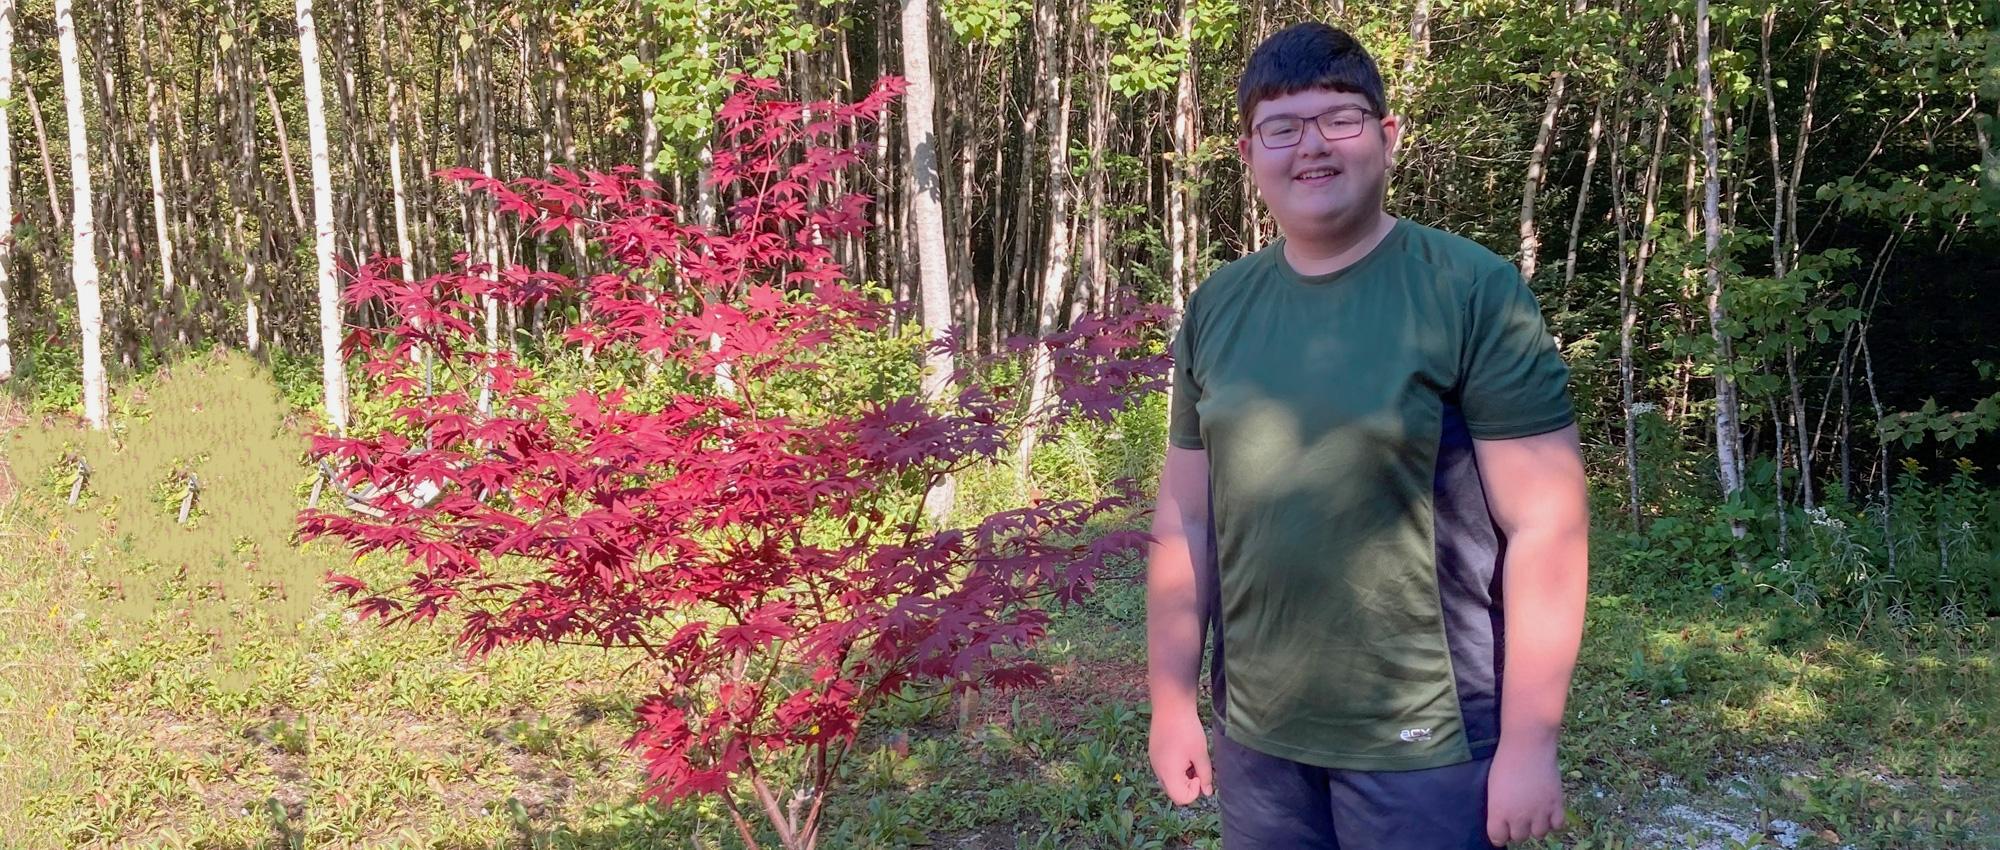 A childhood cancer survivor stands in his yard at the start of the school year 